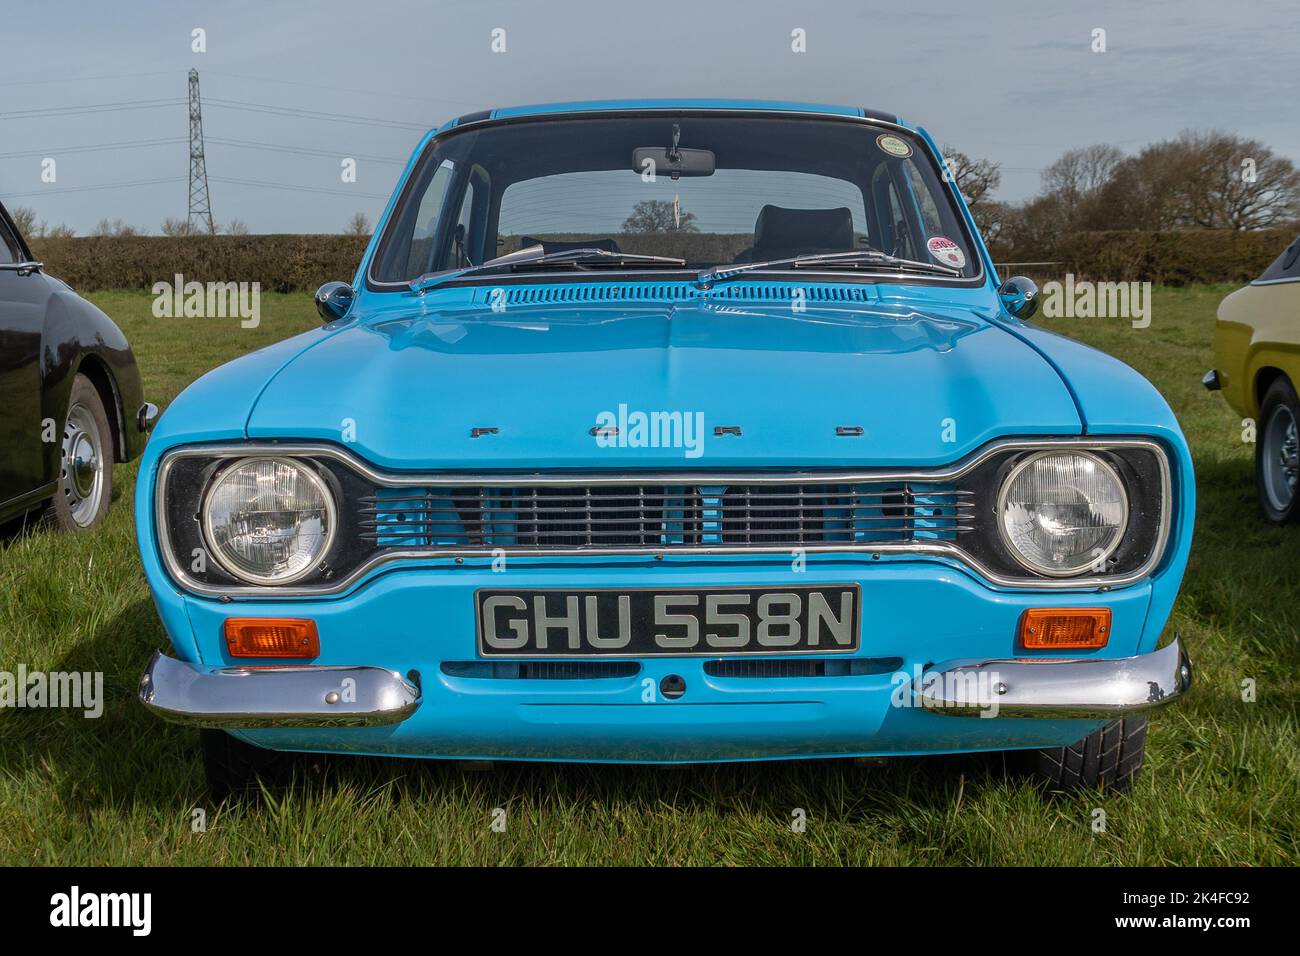 A front view of a 1974 light blue Ford Escort Mk 1 parked on grass at a meet of classic car clubs Stock Photo